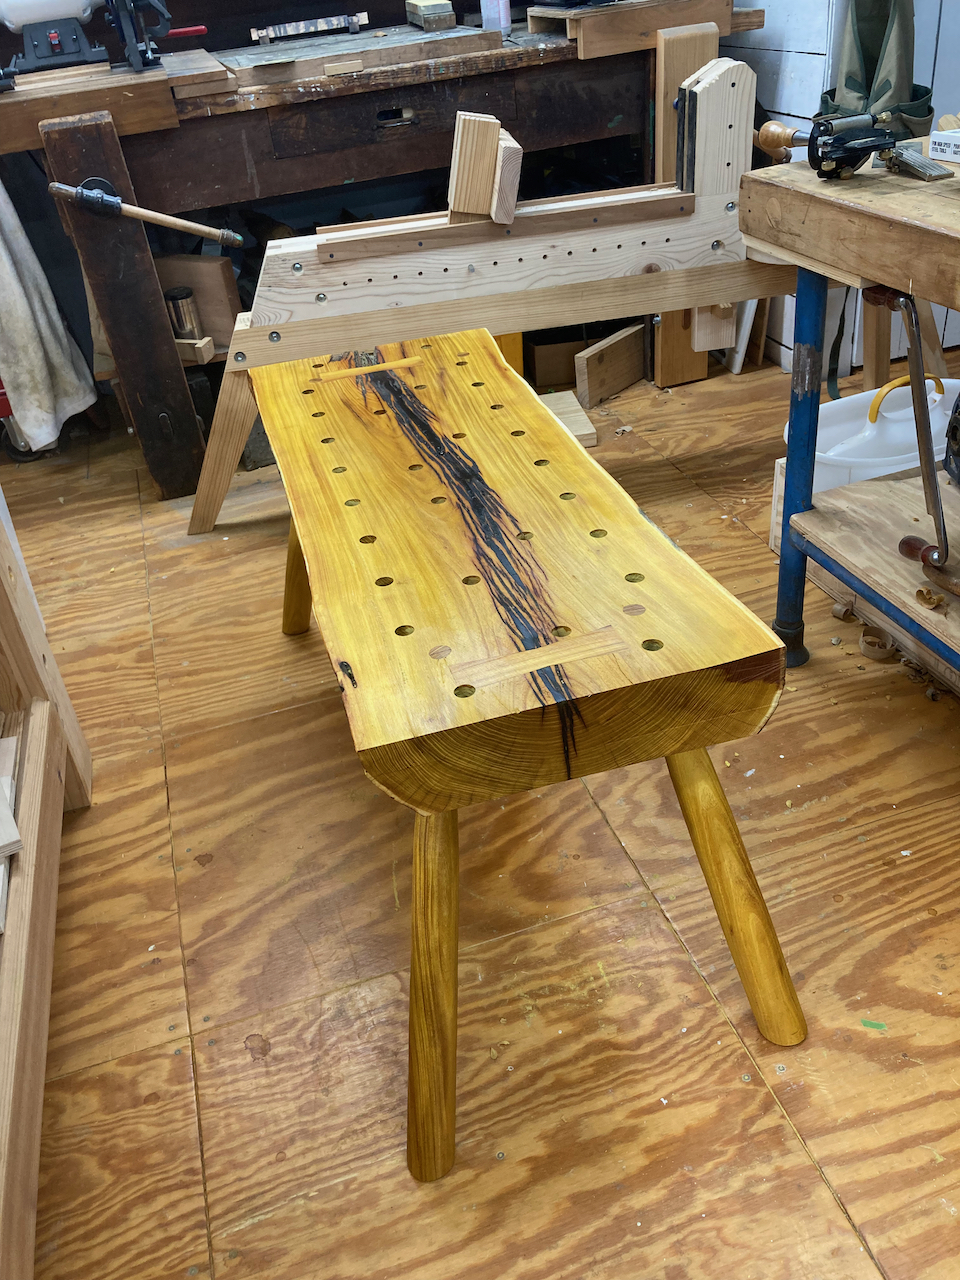 Low bench with a fresh coat of finish